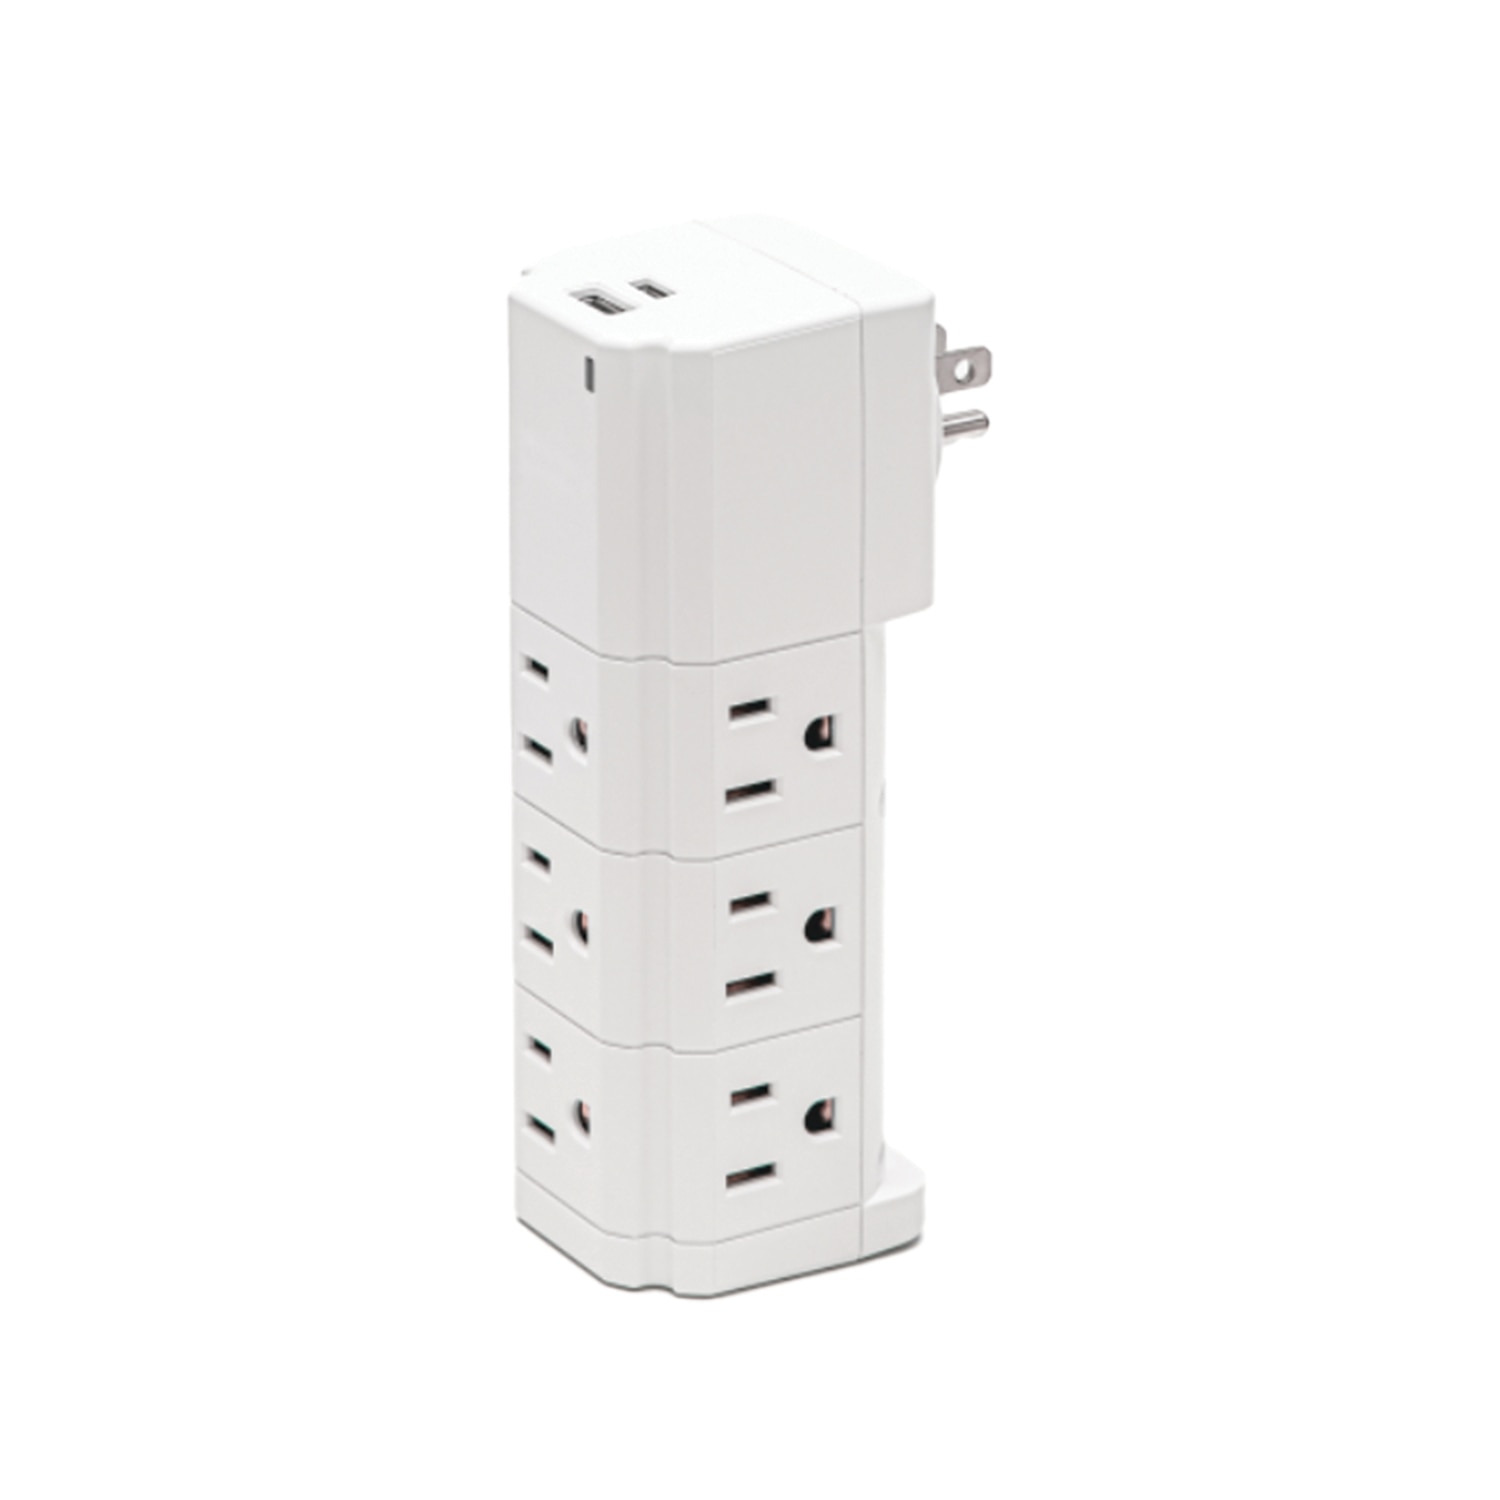 Swivel Multi-Port Adapter with 9 AC Outlets + 1 USB-A + 1 USB-C Output Port. Charge